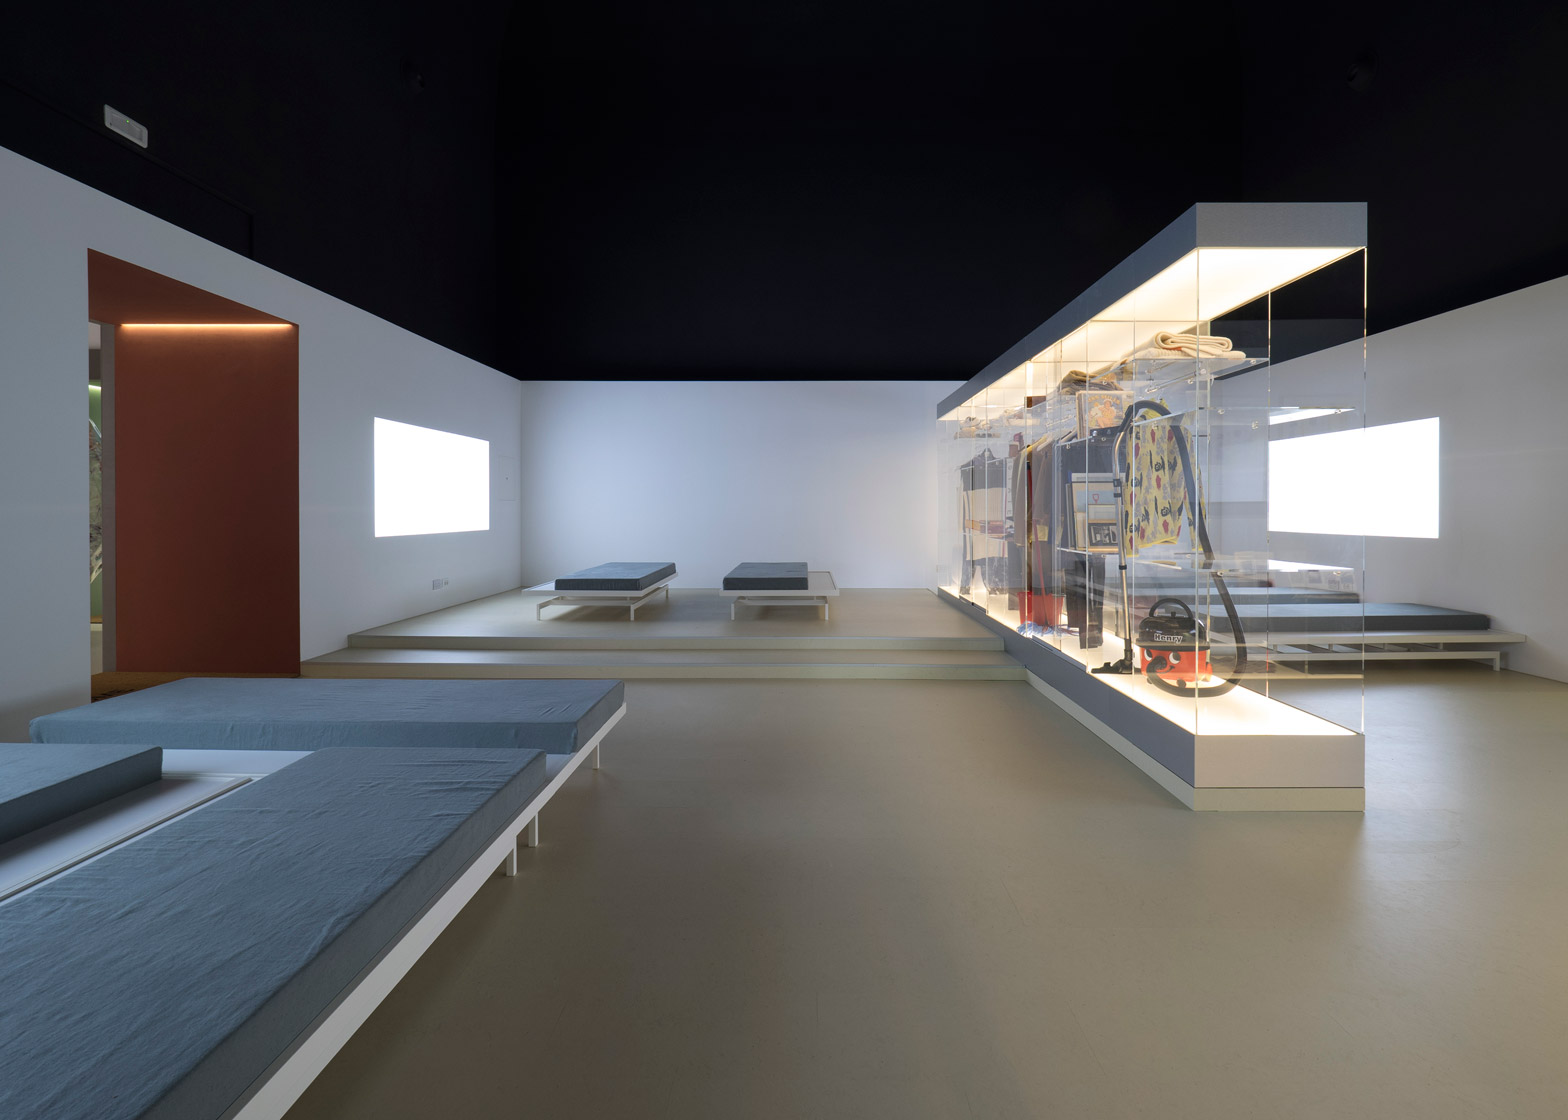 Redesign 1 British Pavilion Calls for Architects to Redesign Home Ownership rather than Houses